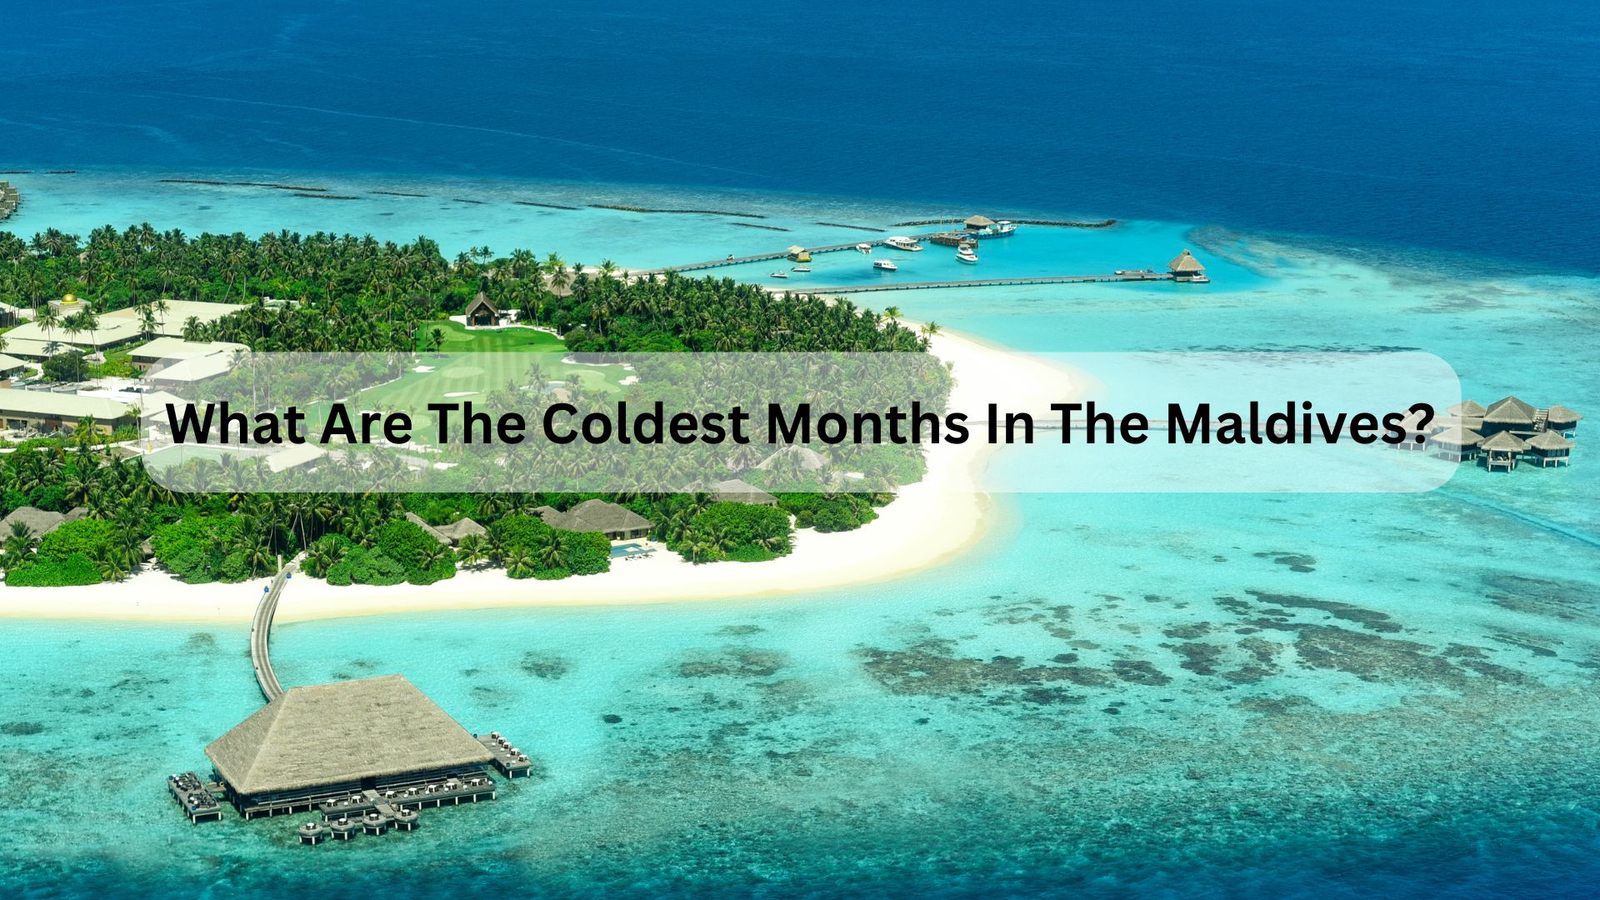 What Are The Coldest Months In The Maldives?